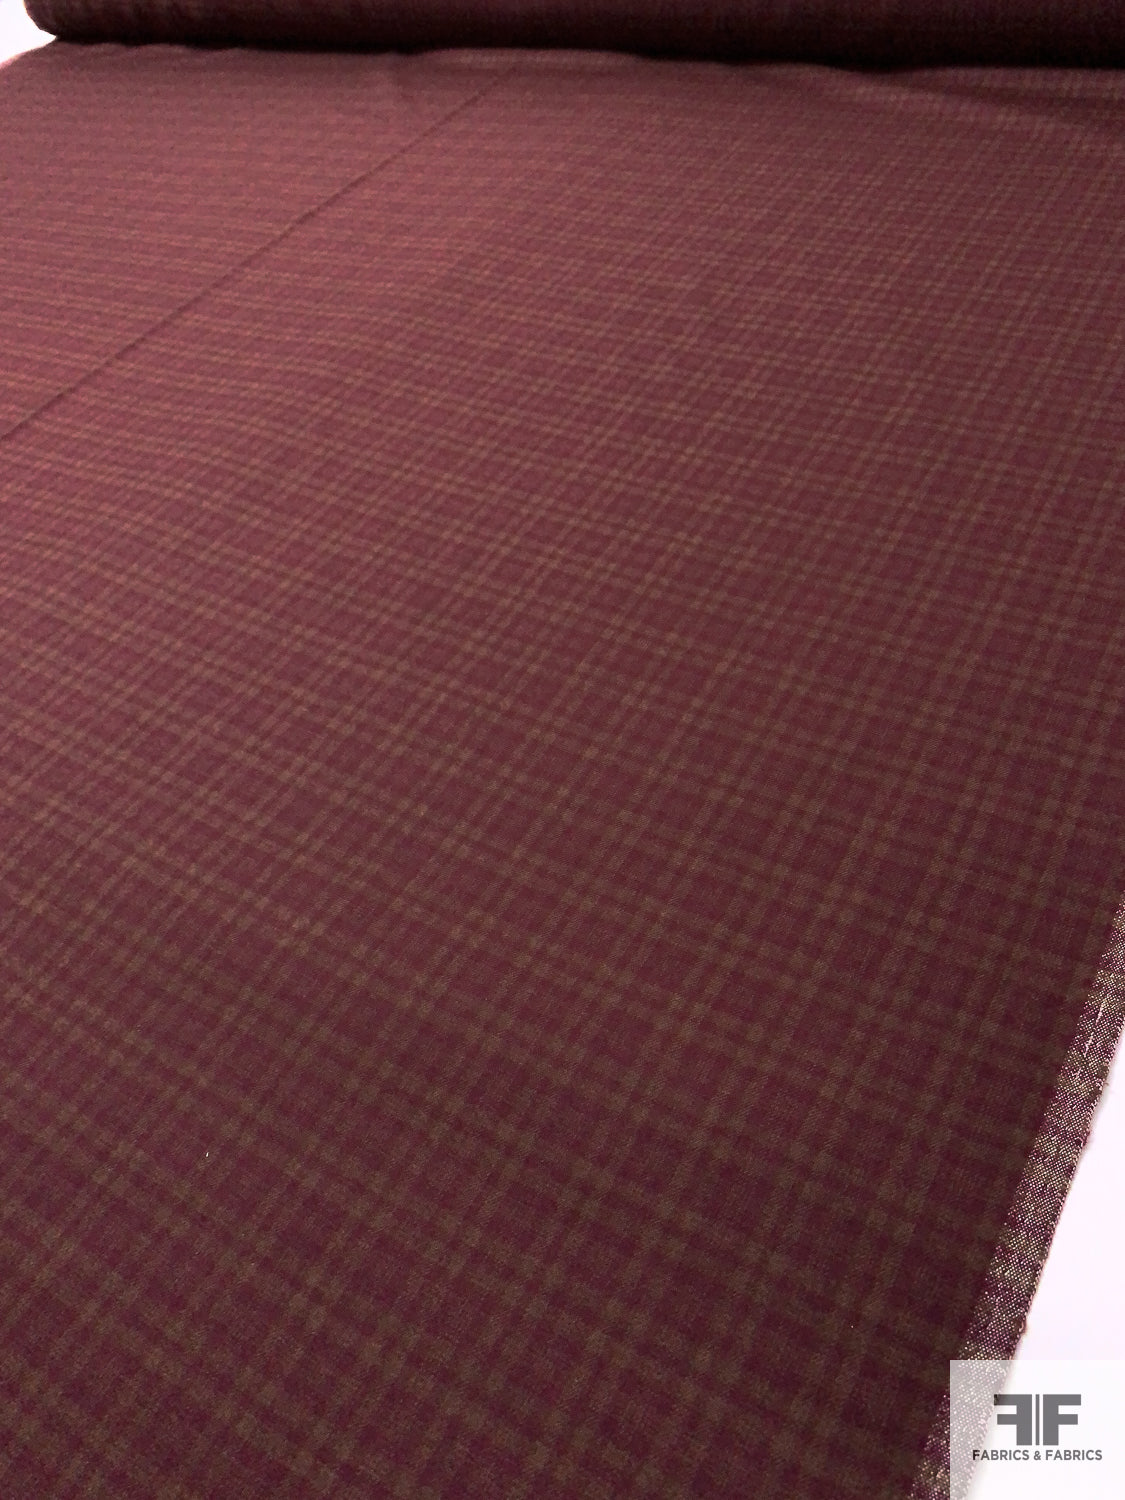 Plaid Flannel Wool Suiting - Boysenberry / Saddle Brown